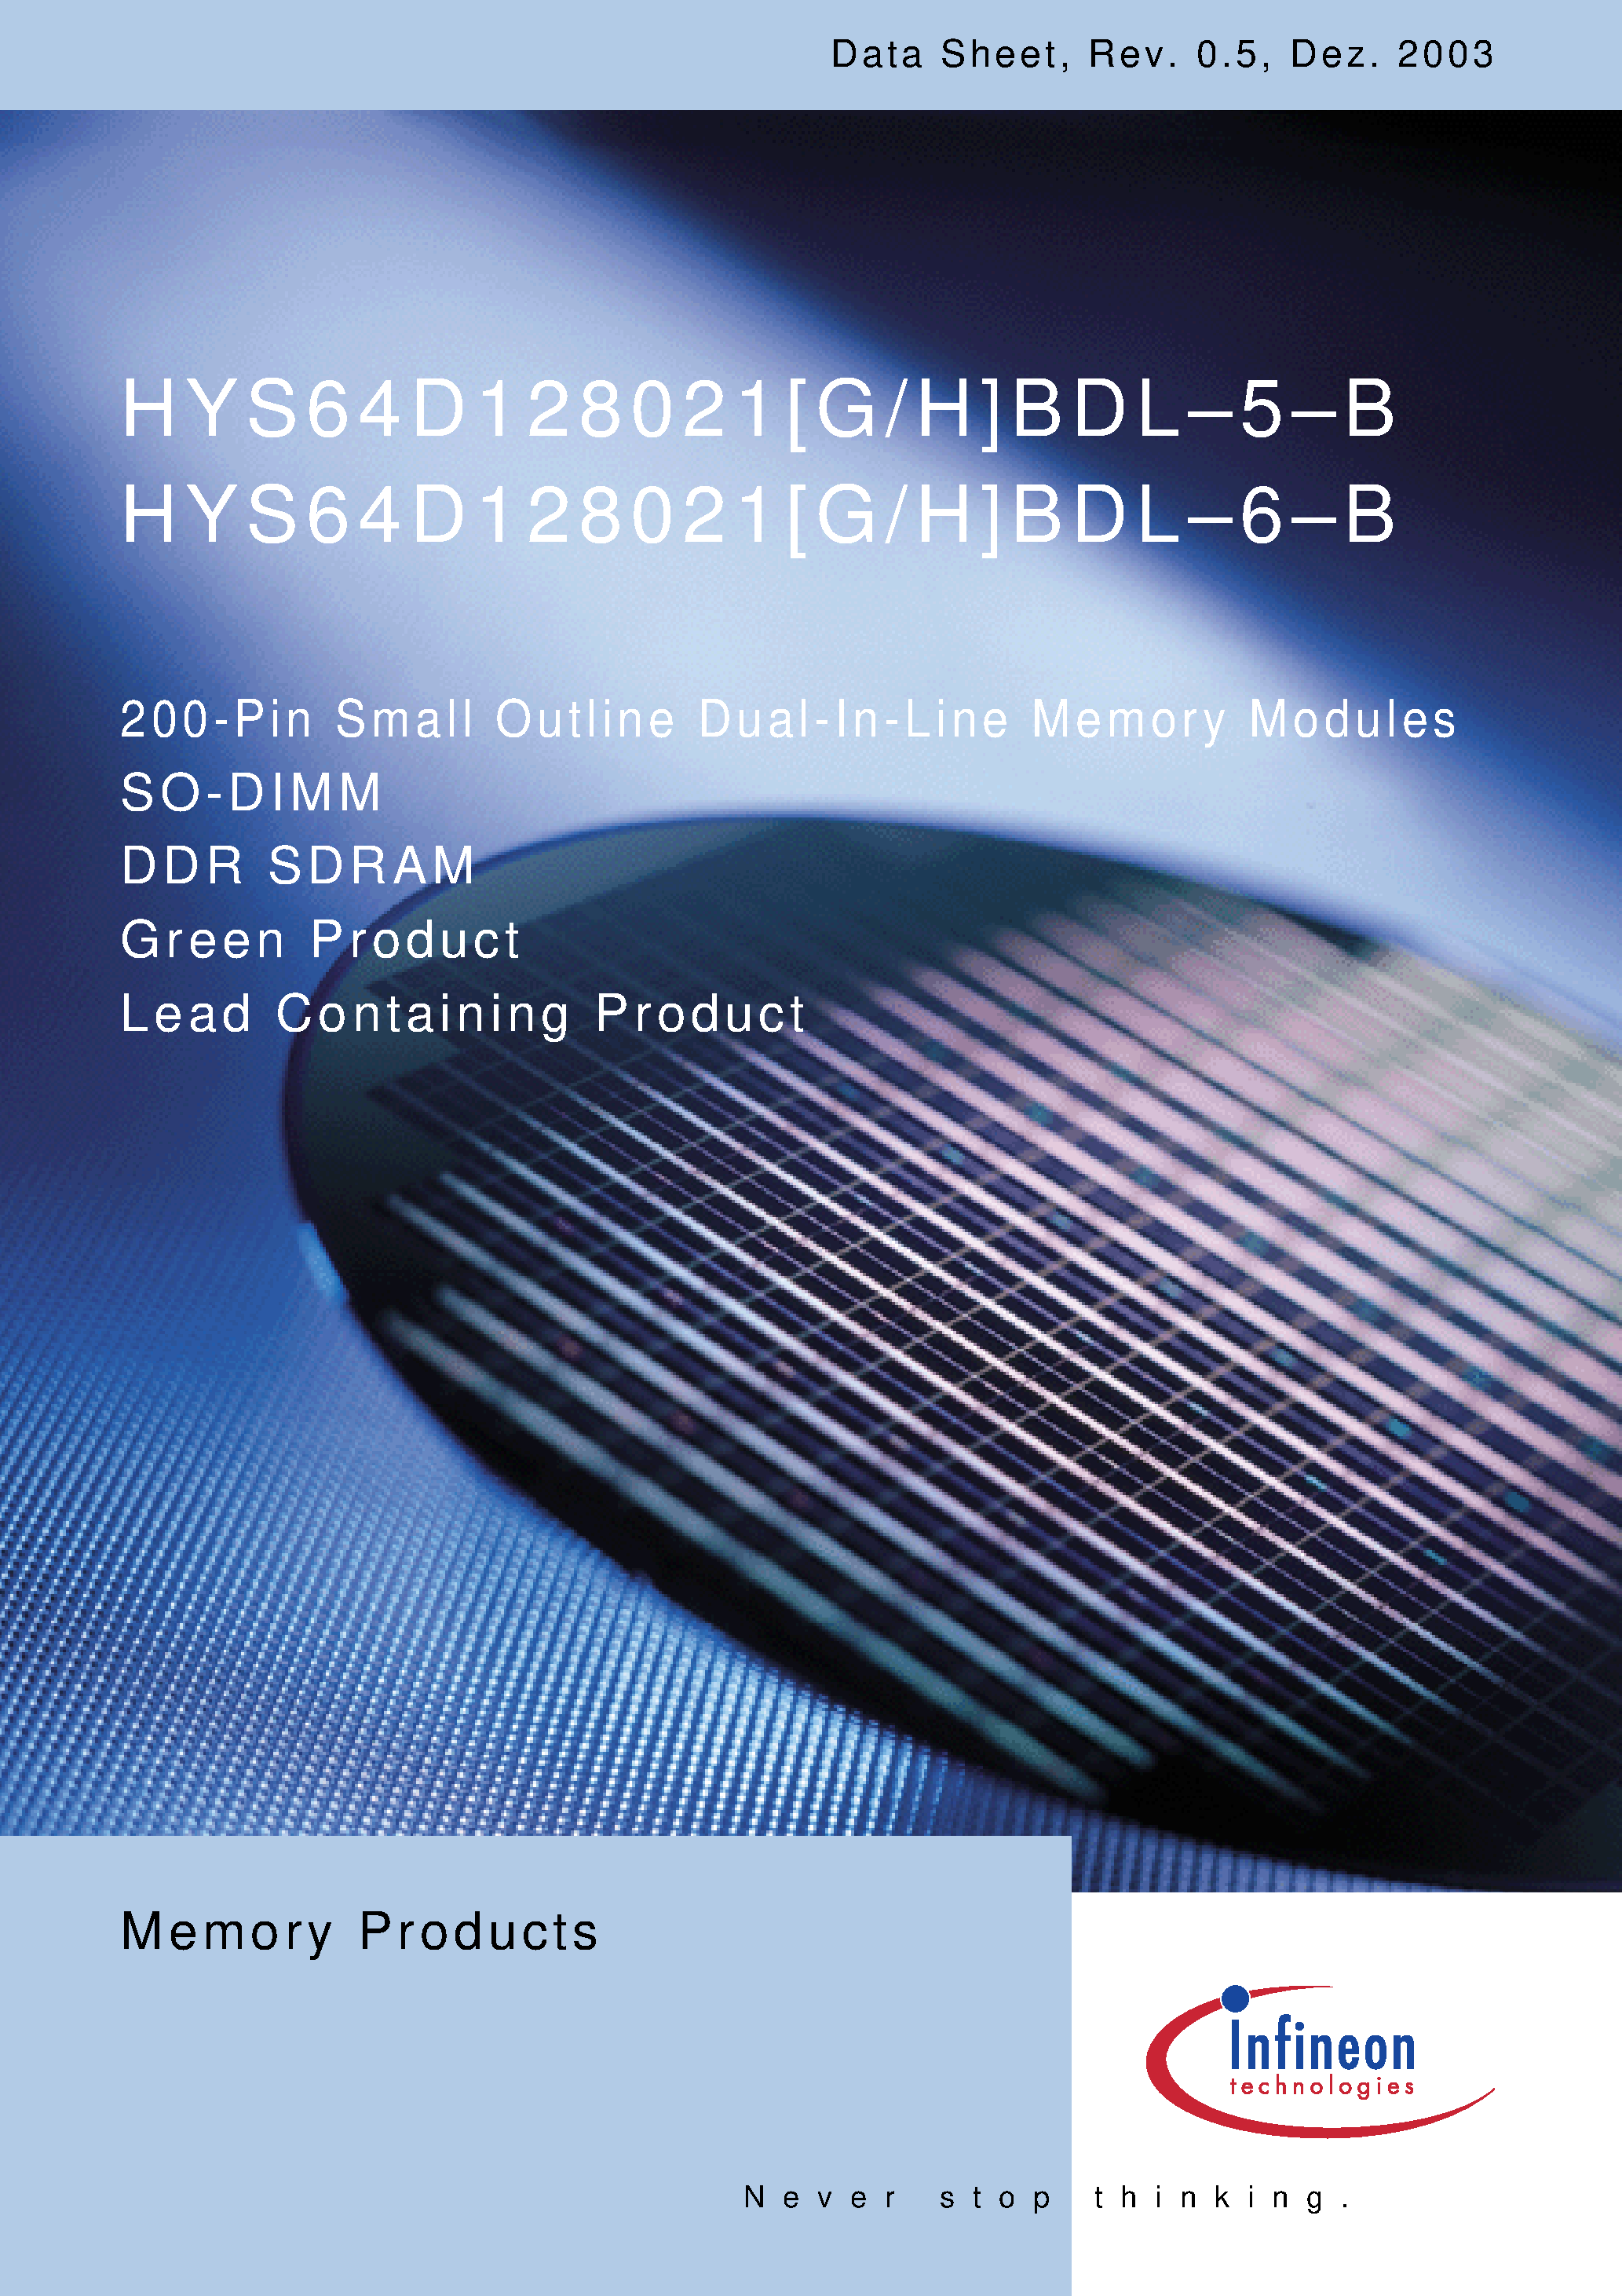 Datasheet HYS64D128021GBDL-6-B - 200-Pin Small Outline Dual-In-Line Memory Modules page 1